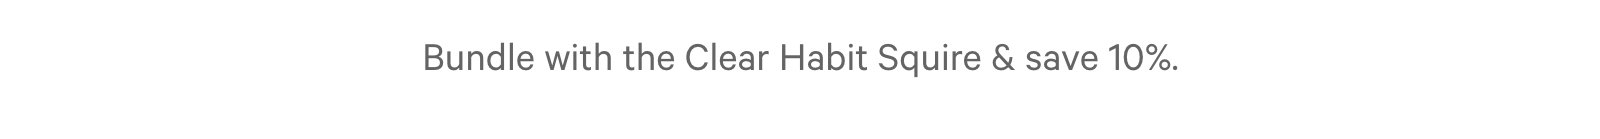 Bundle with the Clear Habit Squire & save 10%